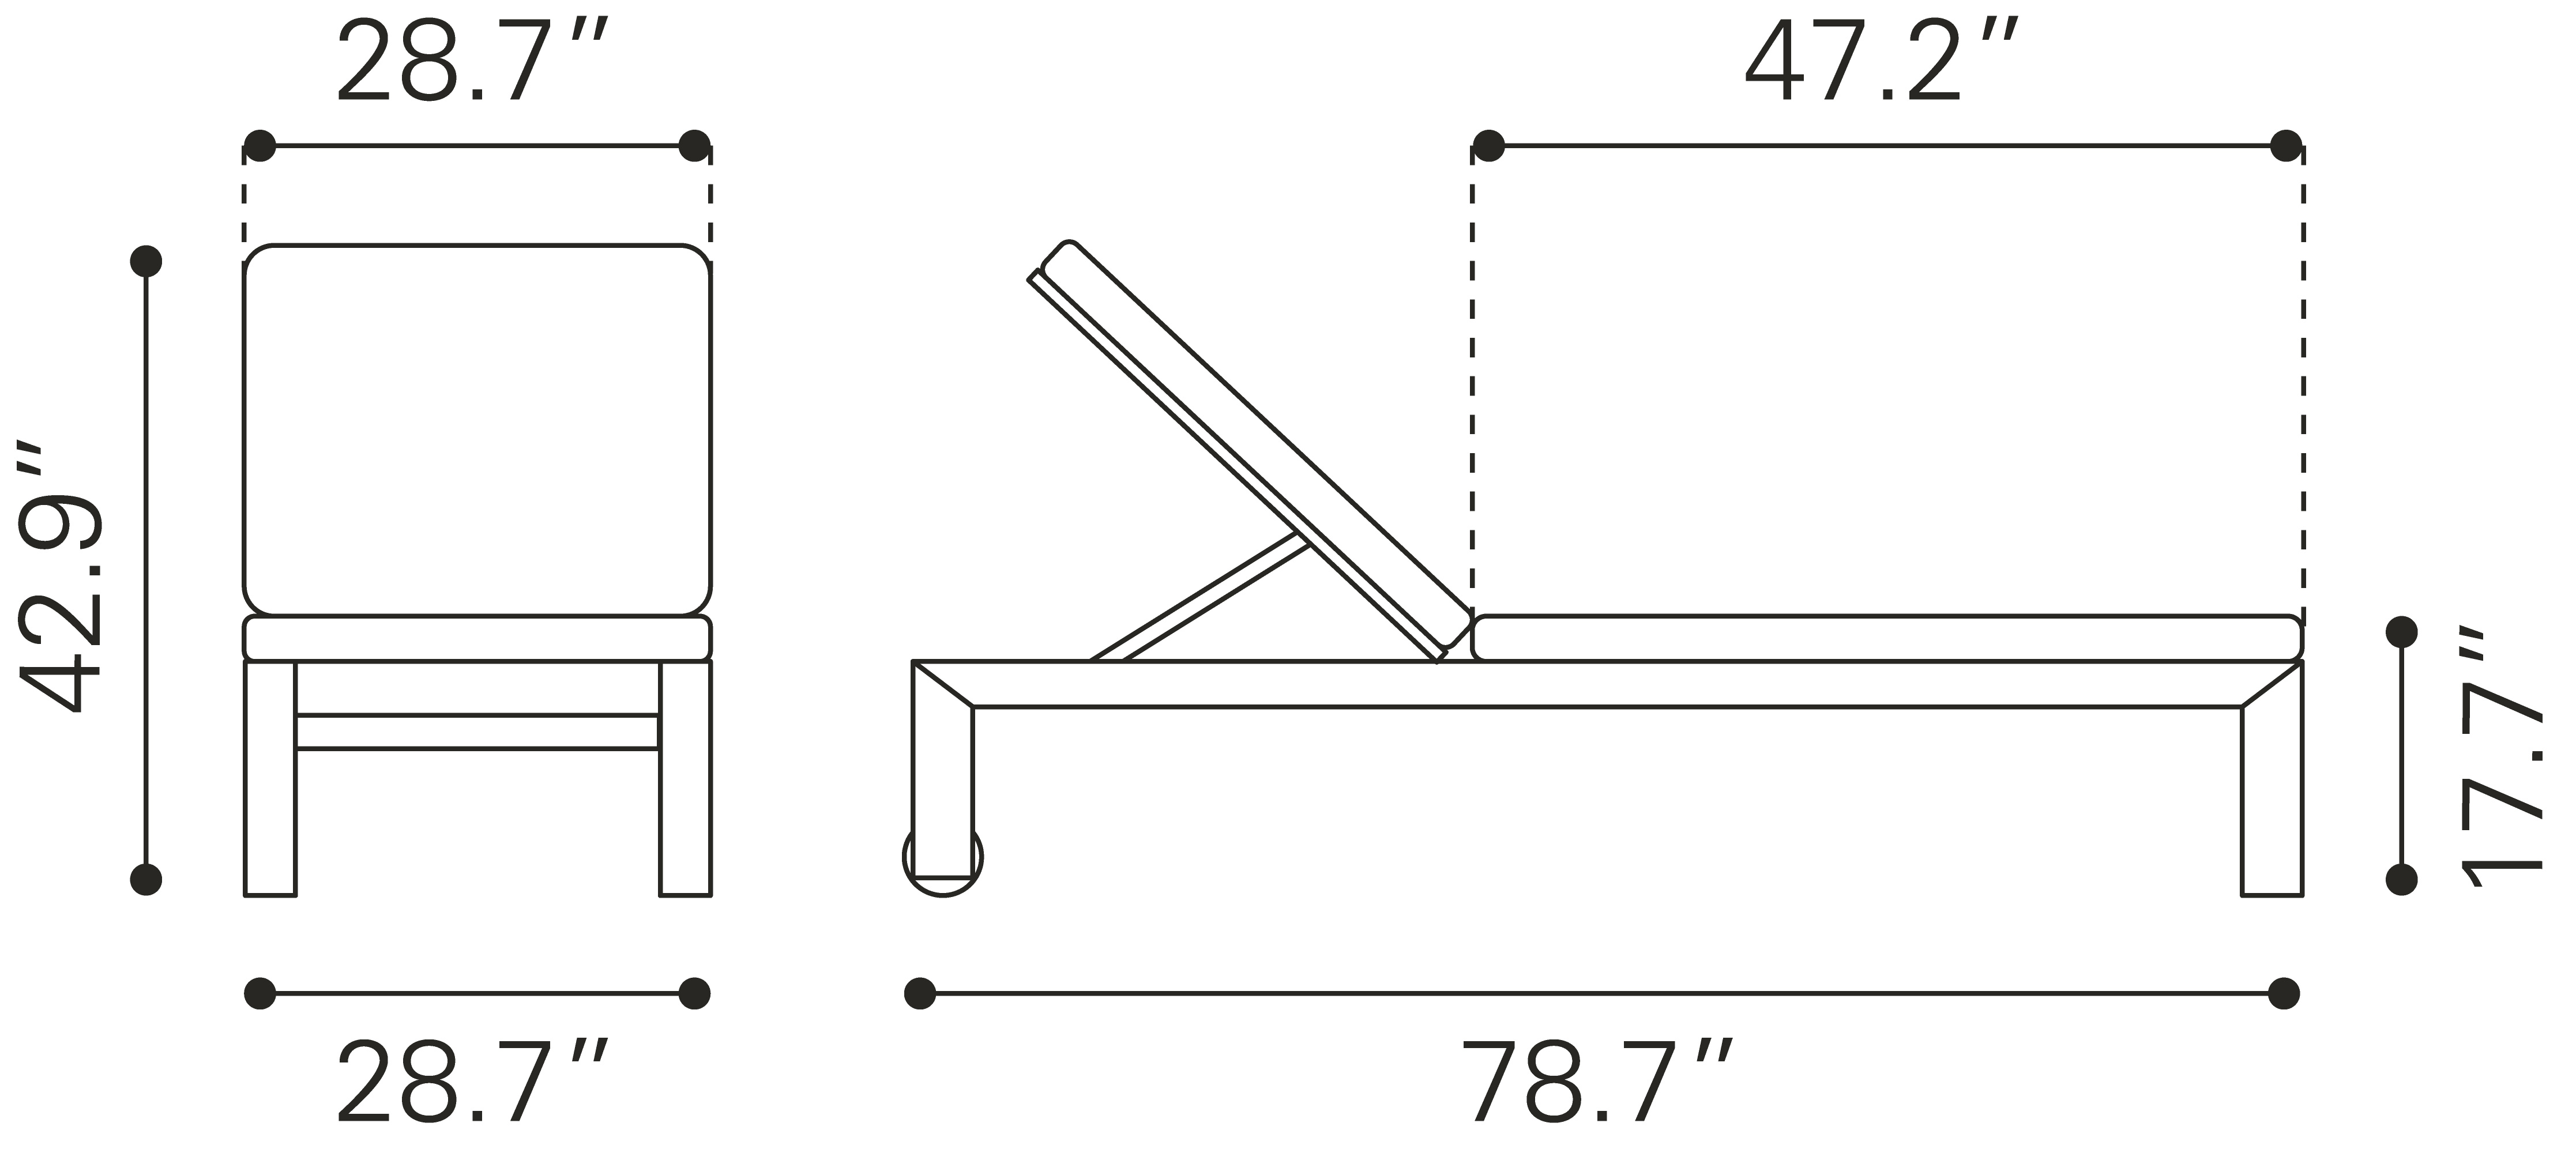 Cozumel Outdoor Lounge Chair Dimensions